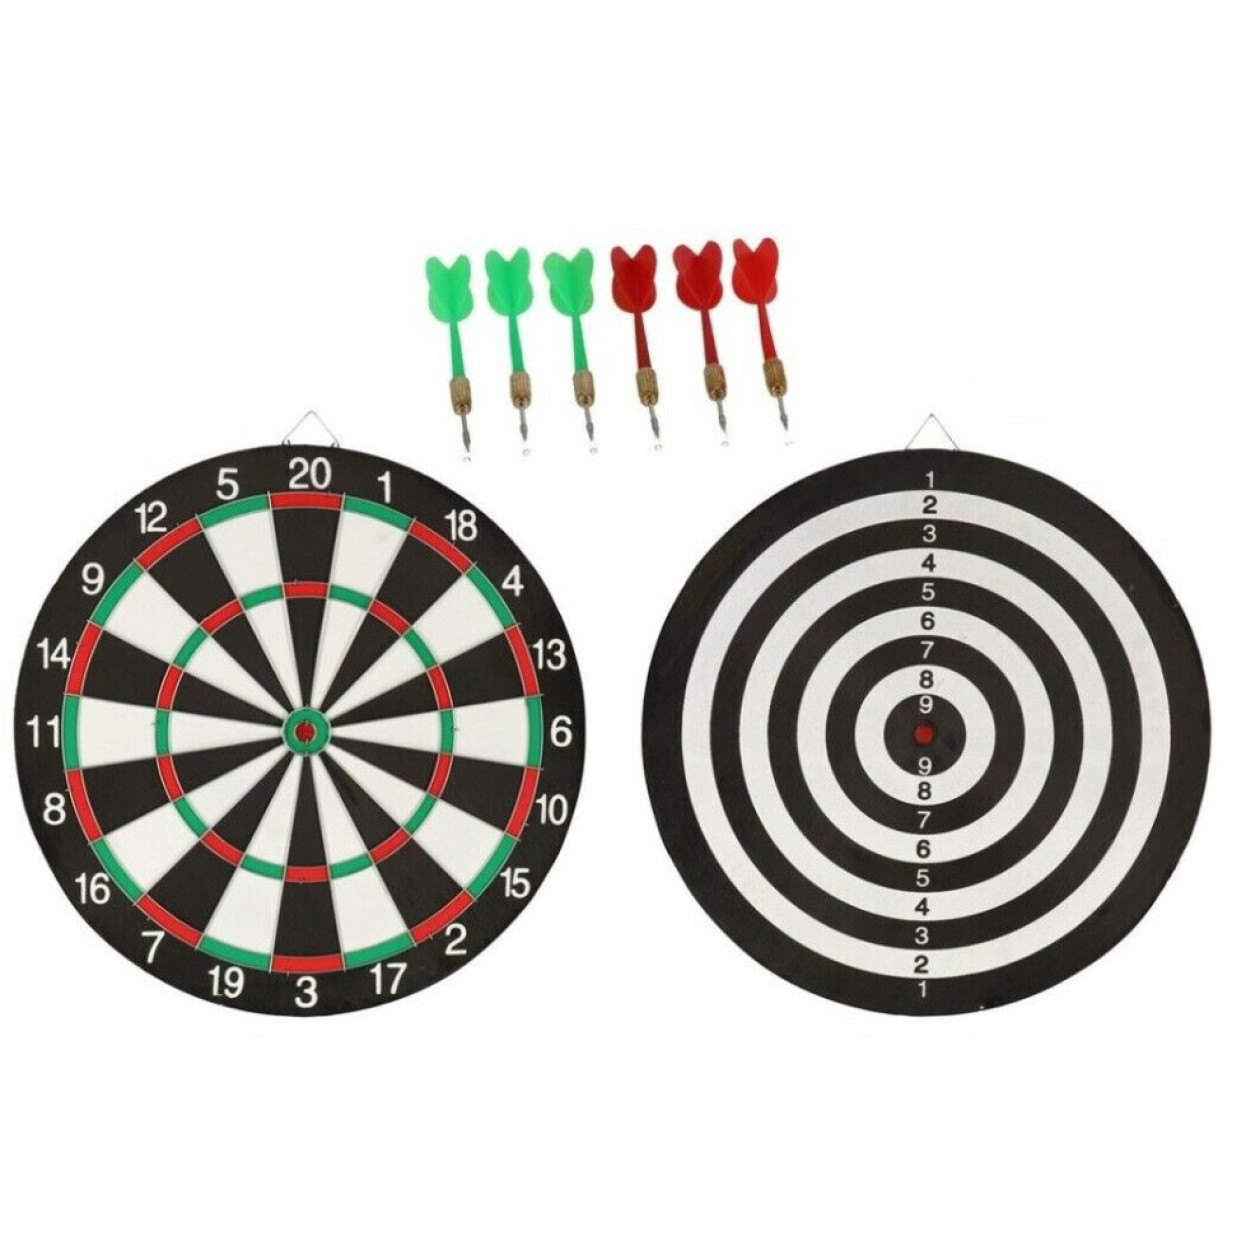 Kandy Toys My Dartboard Doubled Sided With 6 Darts